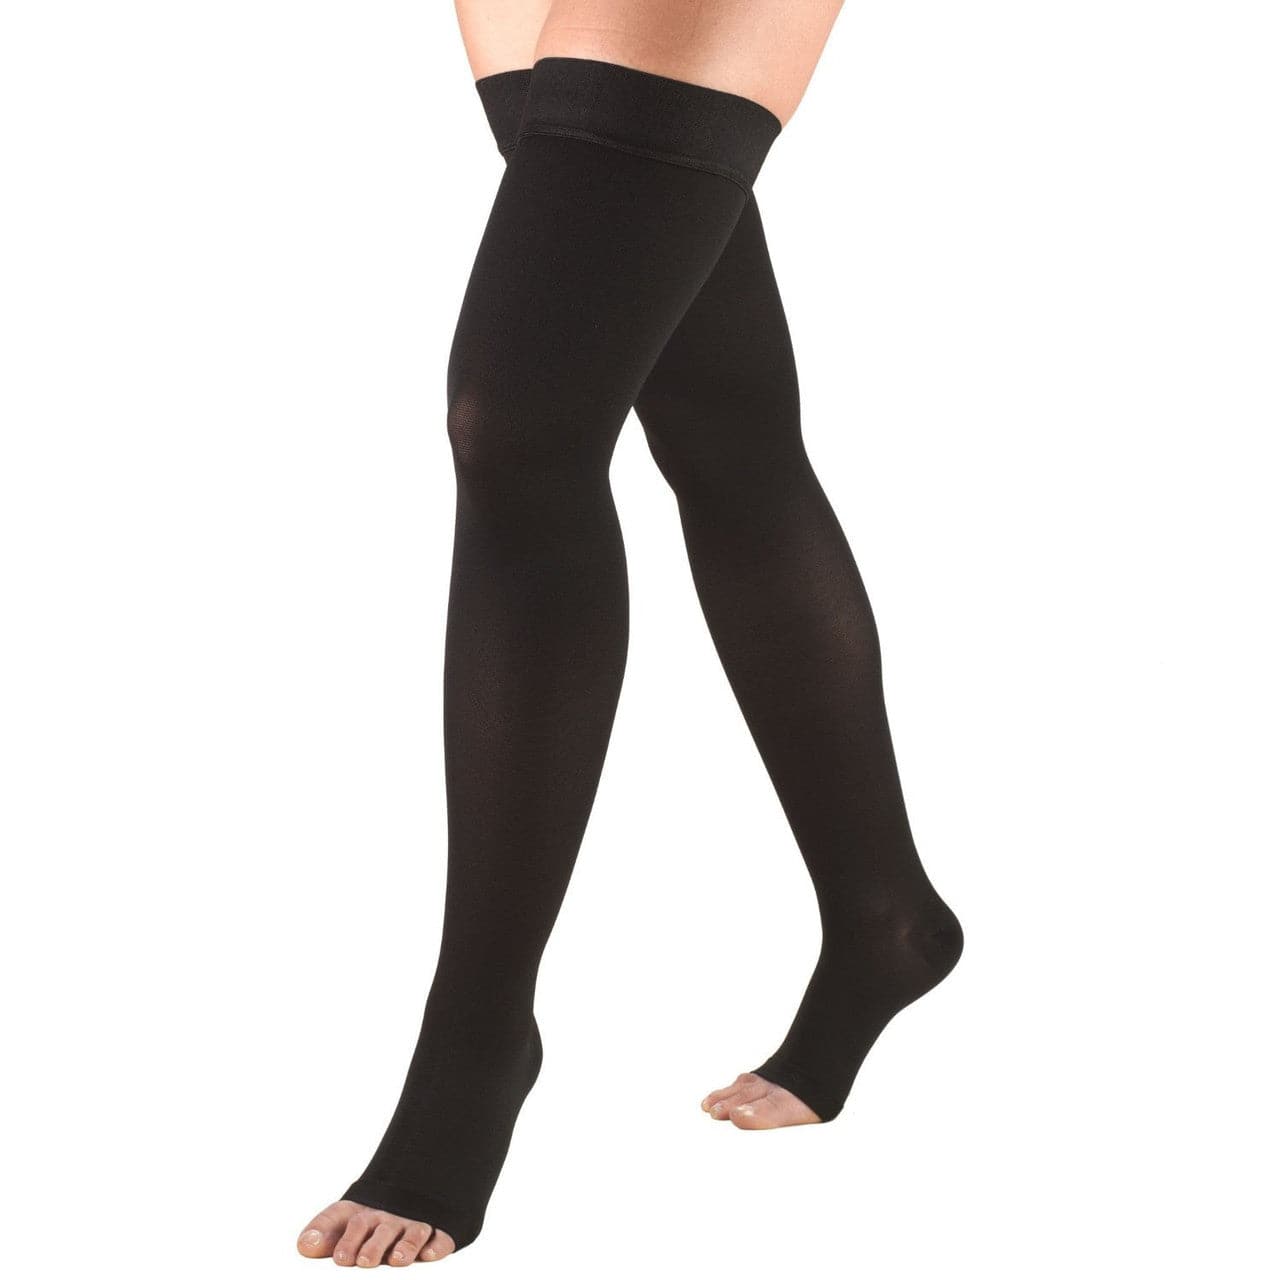 Airway Surgical Truform Thigh High Open Toe Stockings Unisex 20-30 mmHg